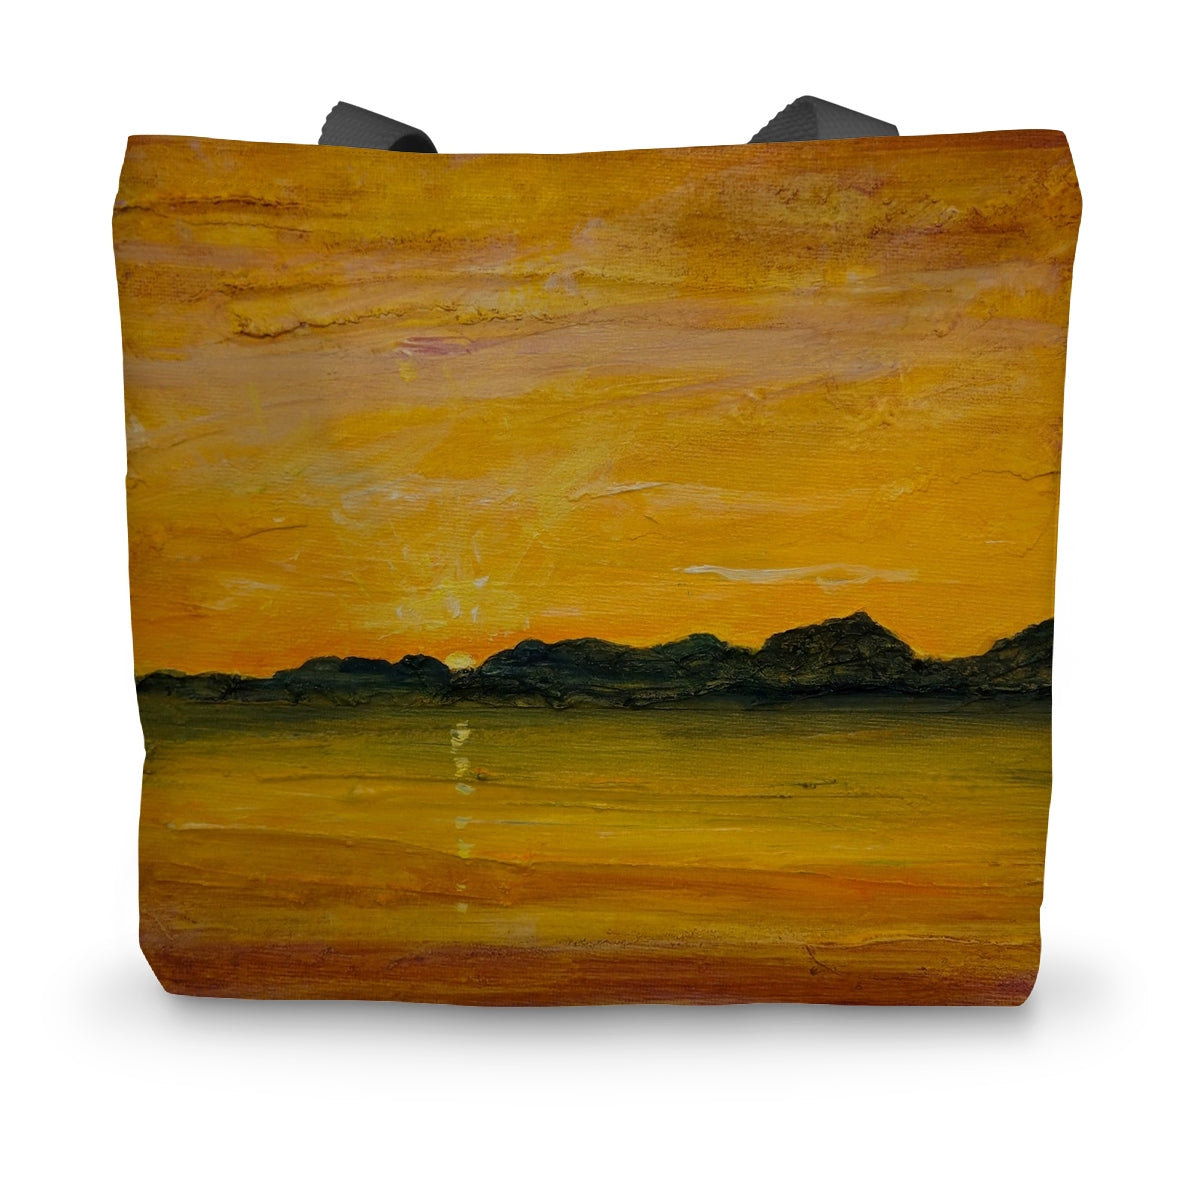 Jura Sunset Art Gifts Canvas Tote Bag-Bags-Hebridean Islands Art Gallery-14"x18.5"-Paintings, Prints, Homeware, Art Gifts From Scotland By Scottish Artist Kevin Hunter